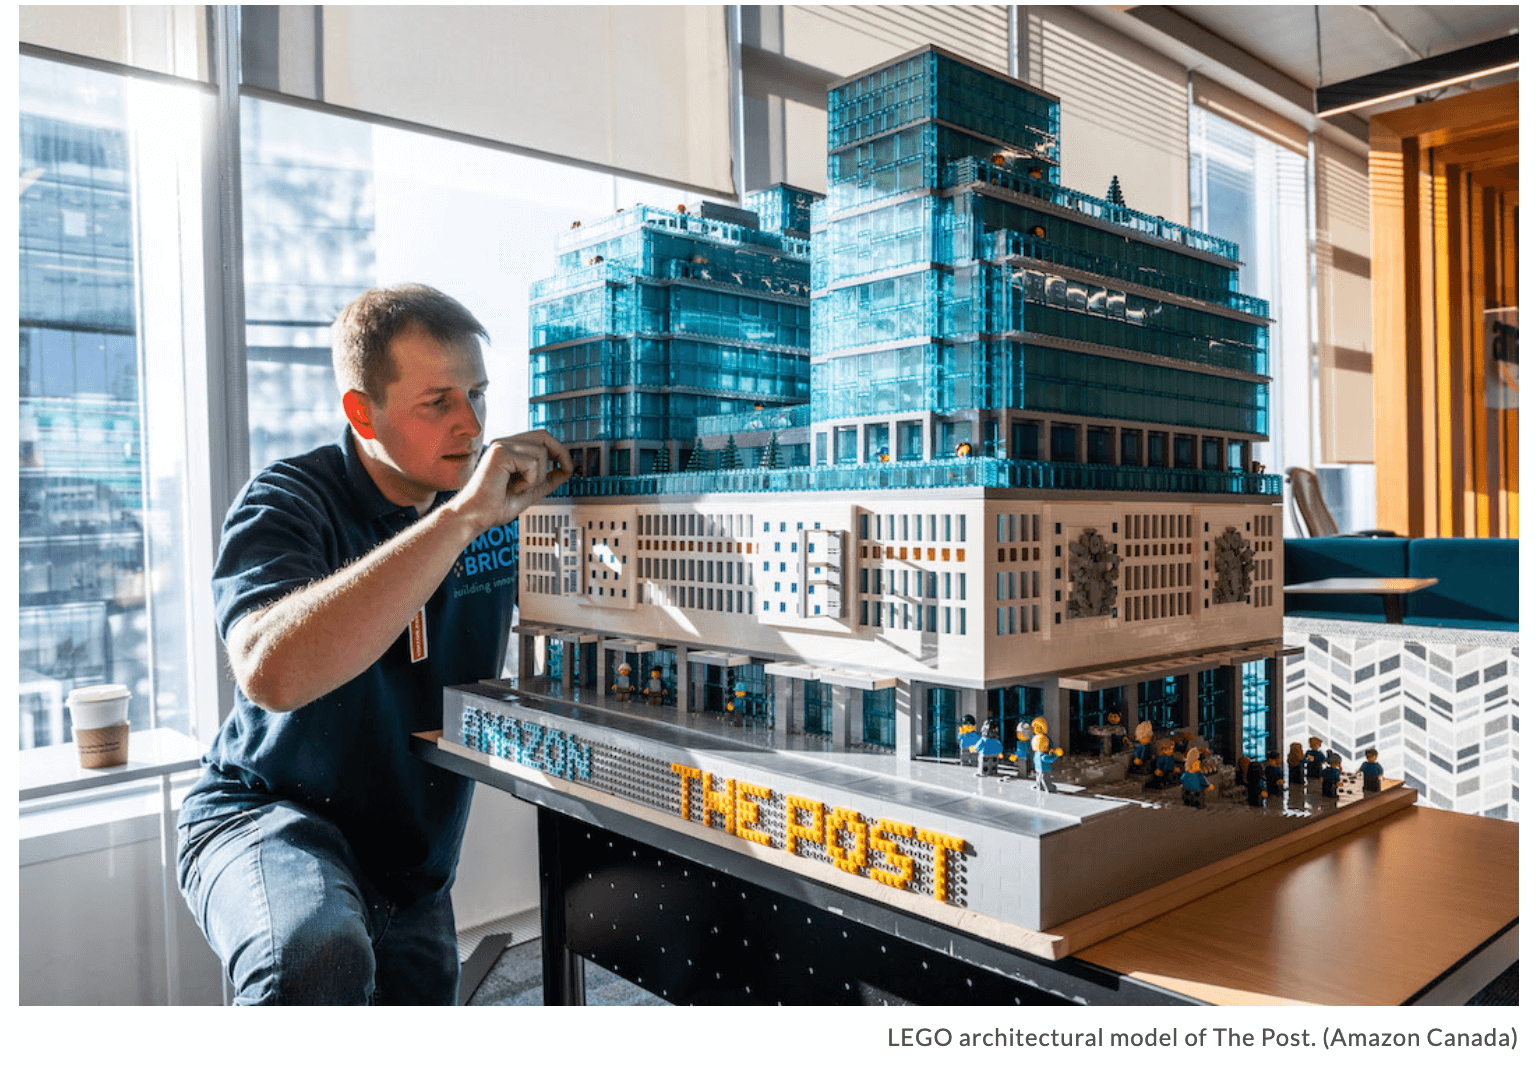 LEGO artist, Graeme Dymond, working on architectural model of The Post.